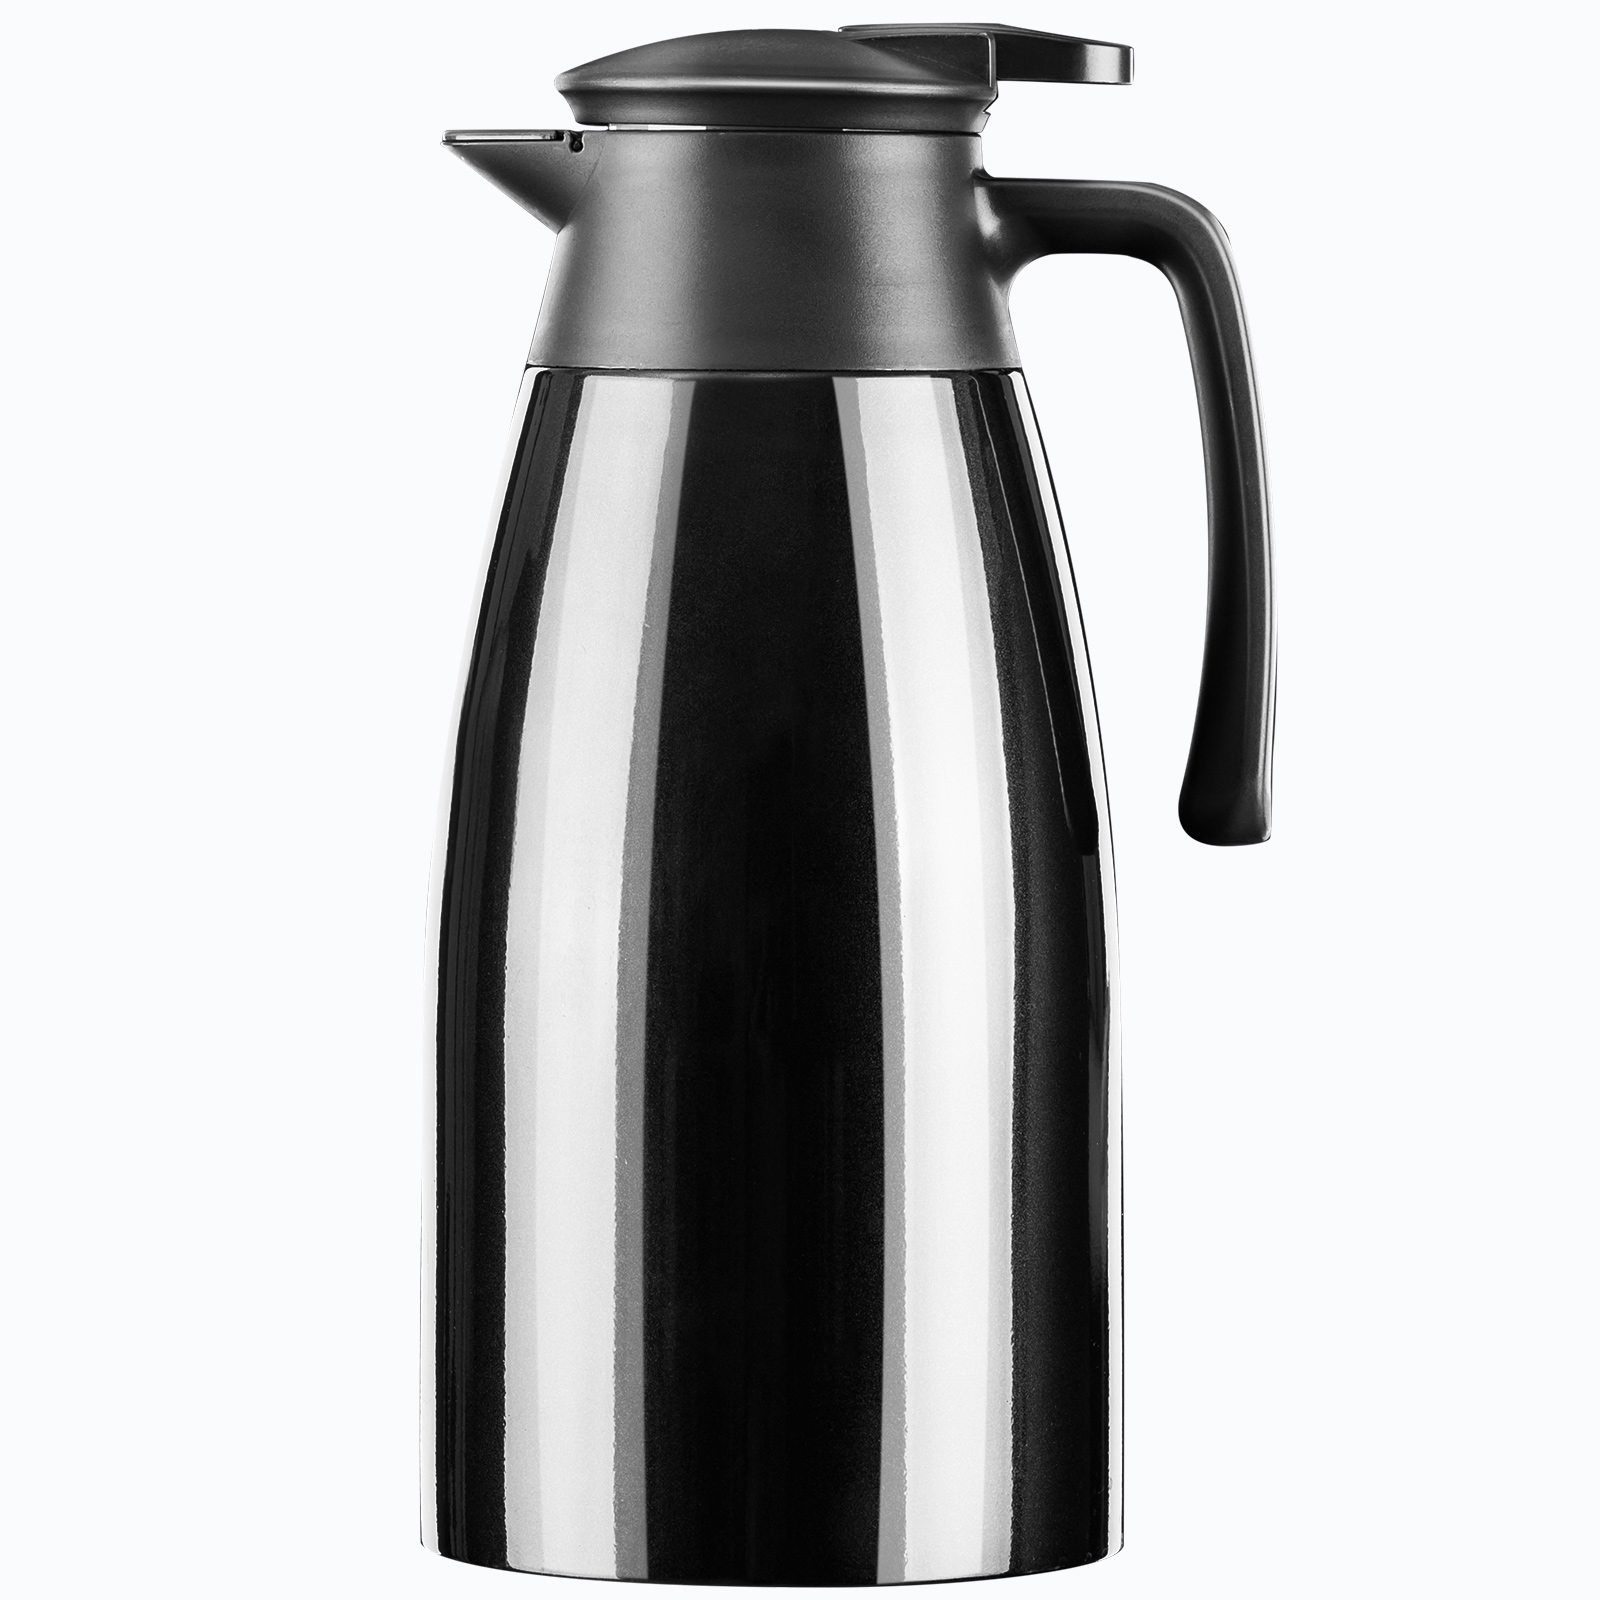 1000ml Arabian Coffee Thermal Carafe 24 Hour Insulated Stainless